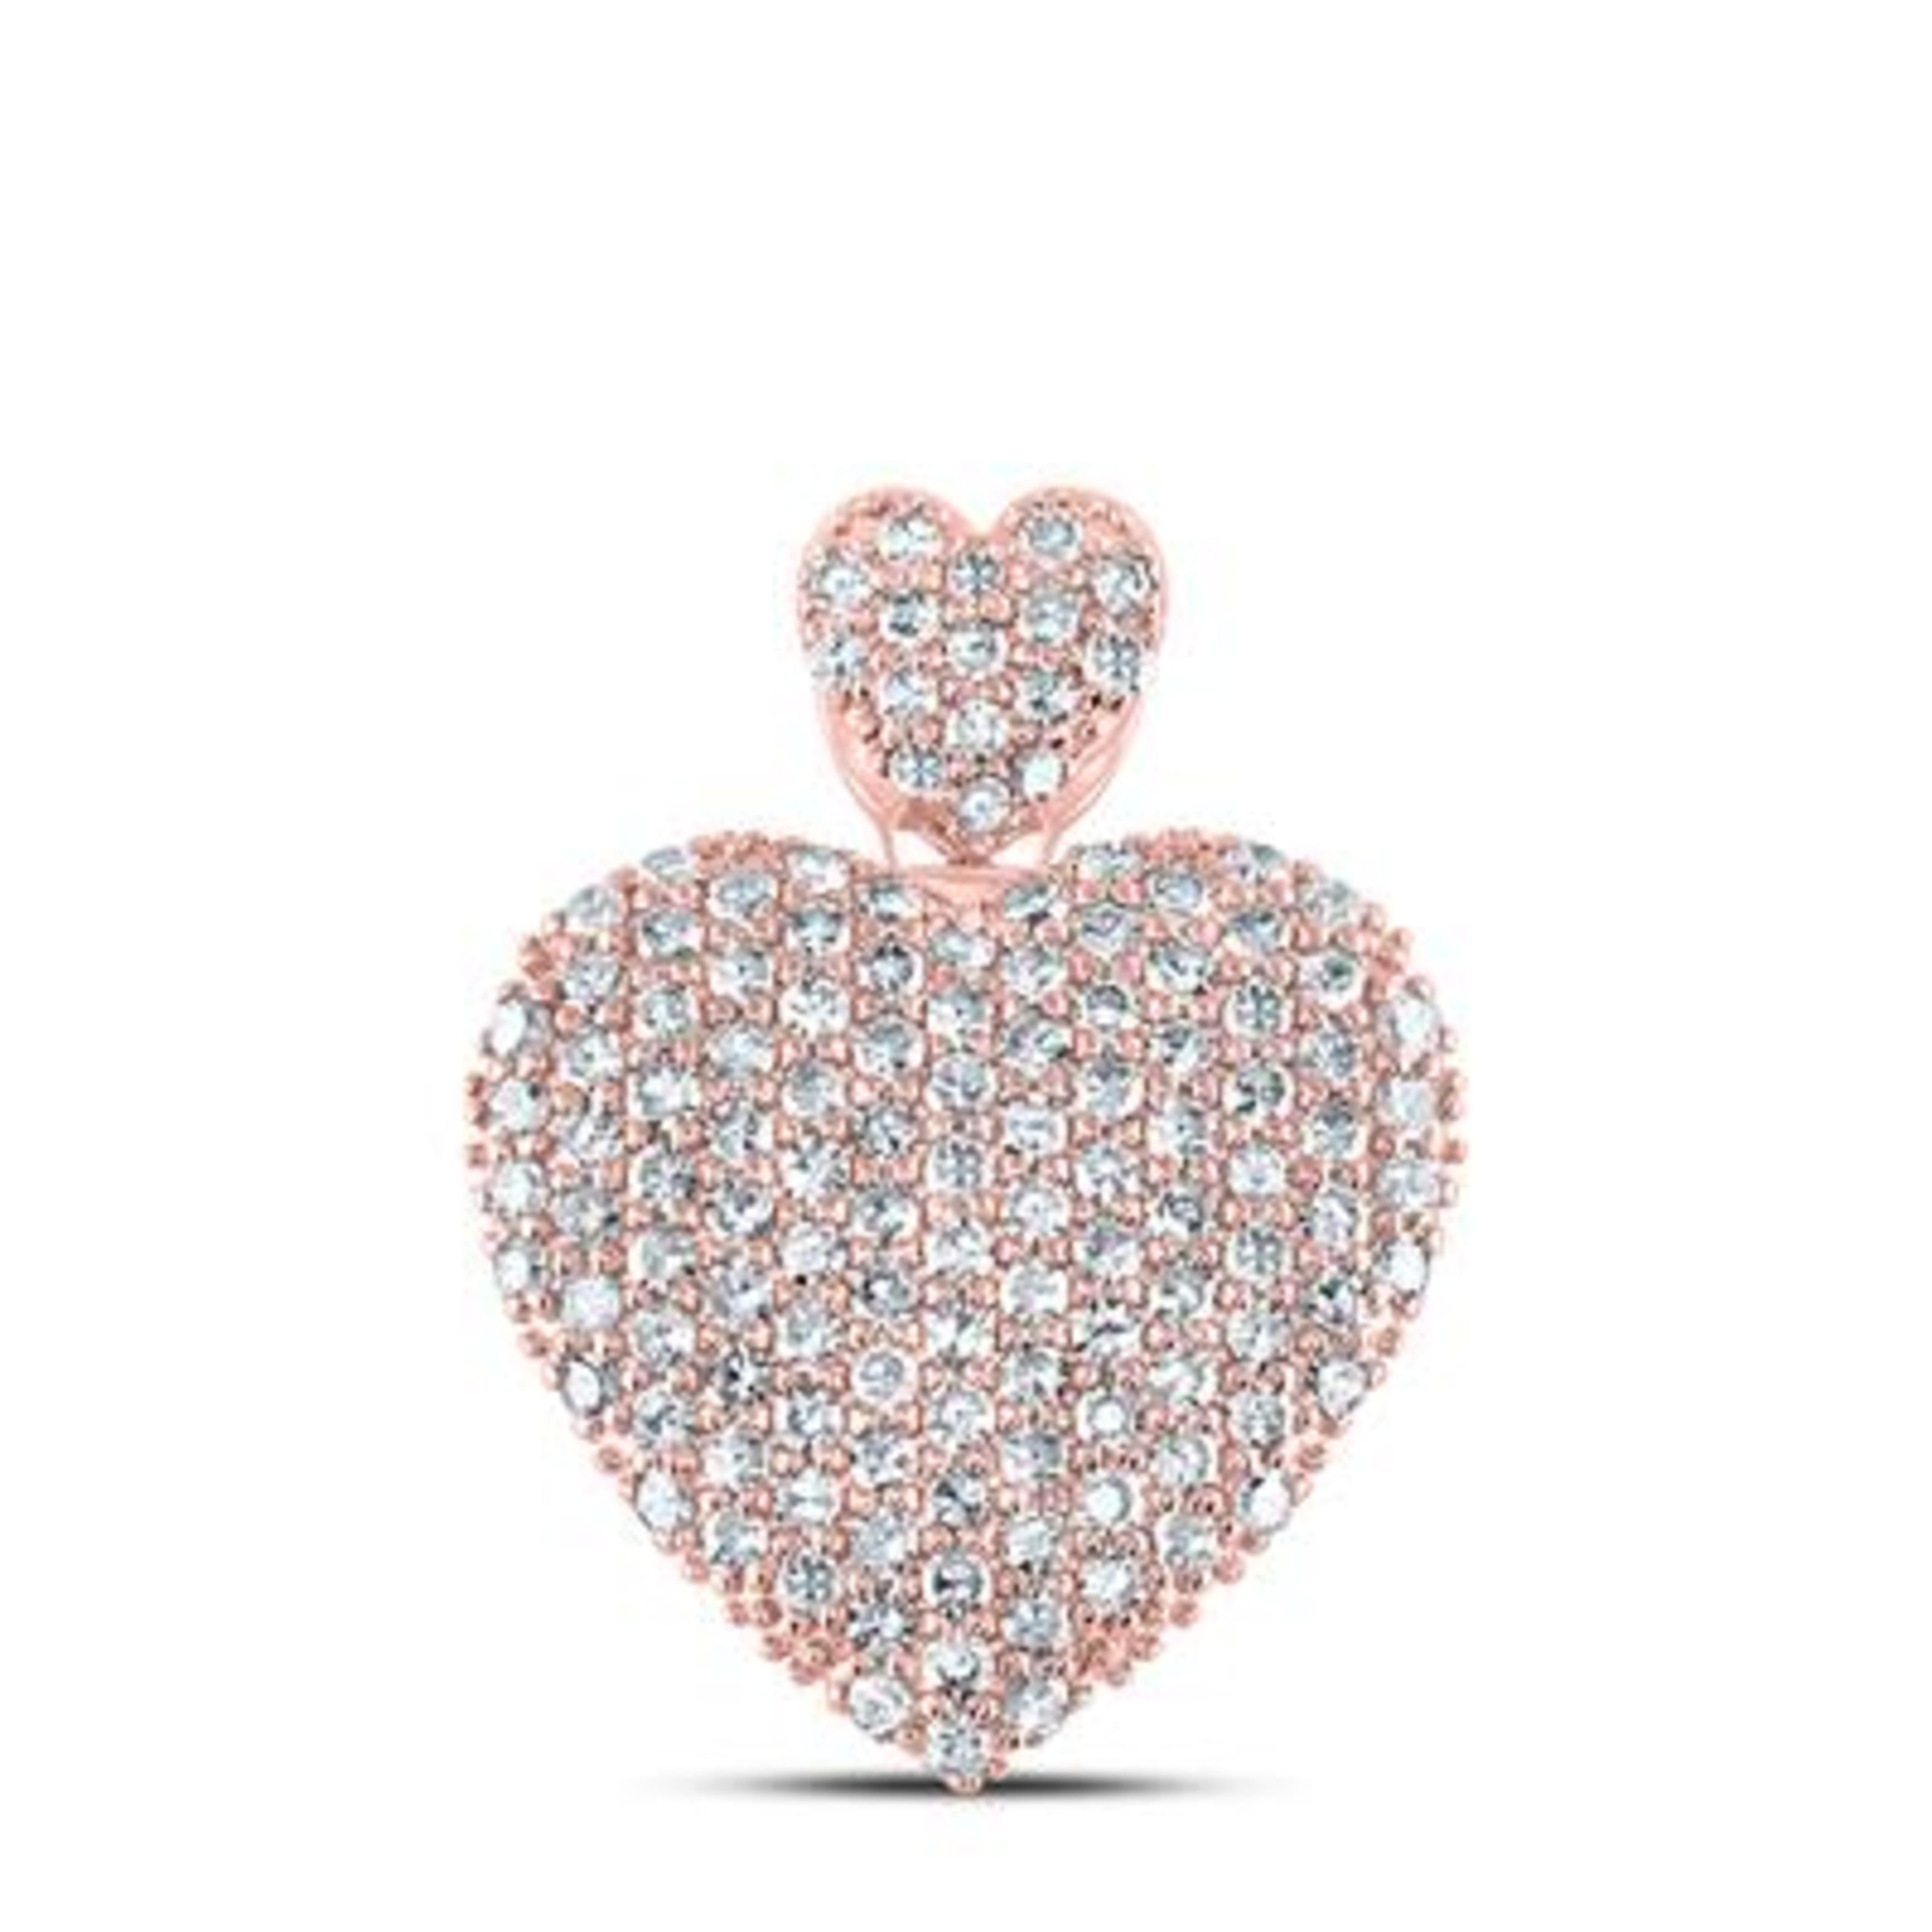 WNG Heart Shape Charms Bling Charms for Jewelry Making Valentine's